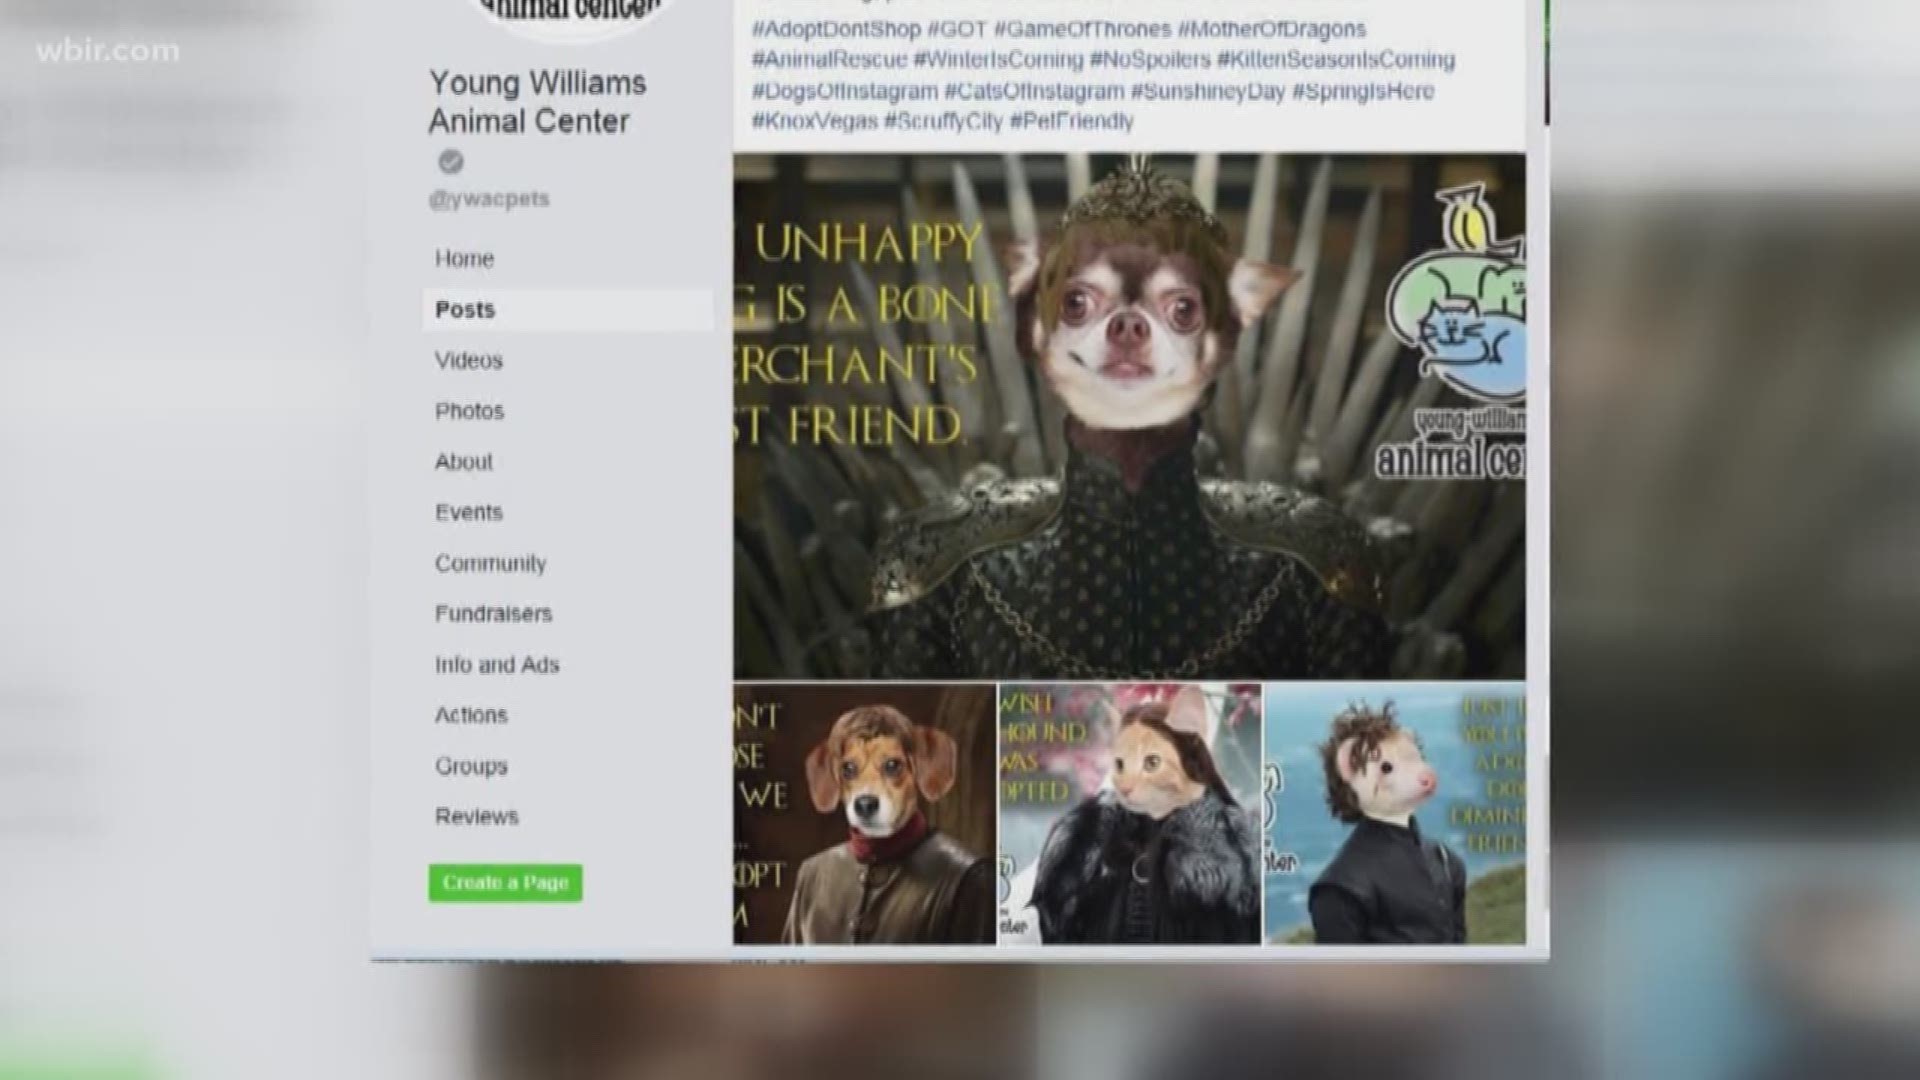 Young-Williams Animal Center celebrated the final season of "Game of Thrones" with a little fun.